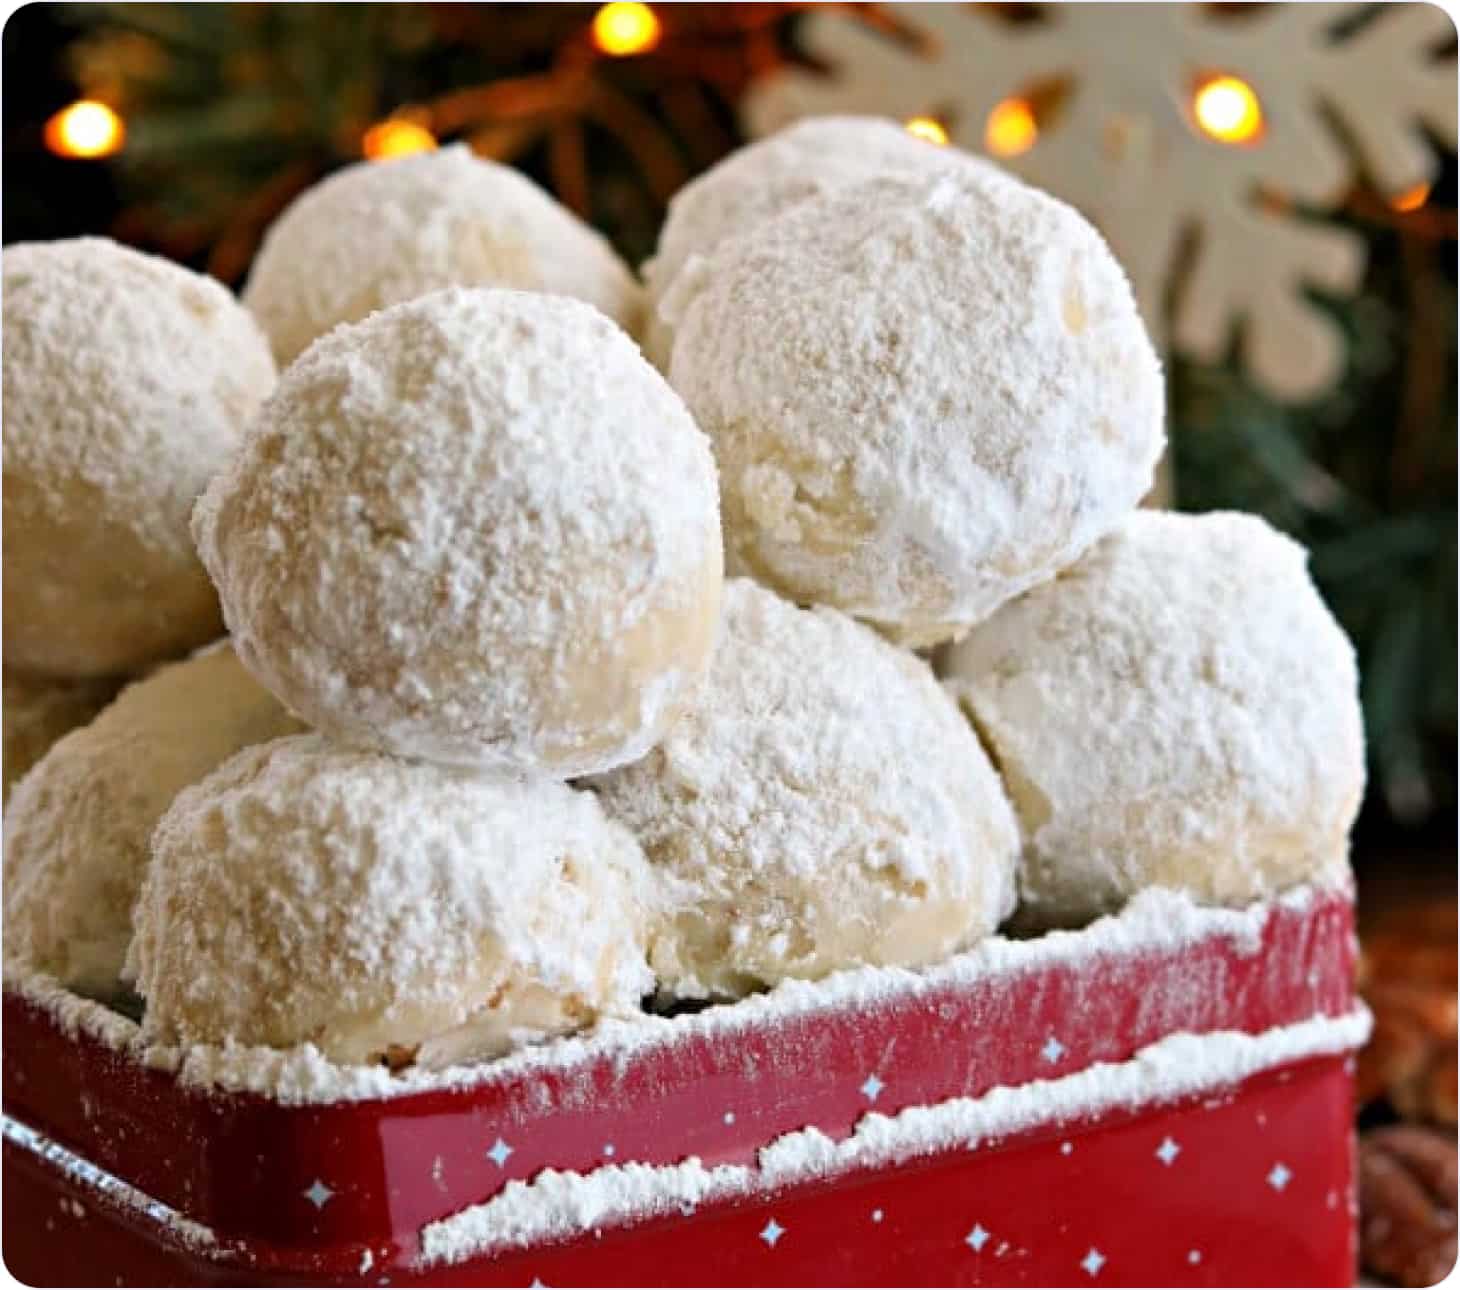 Cookies in the shape of balls sprinkled with powdered sugar